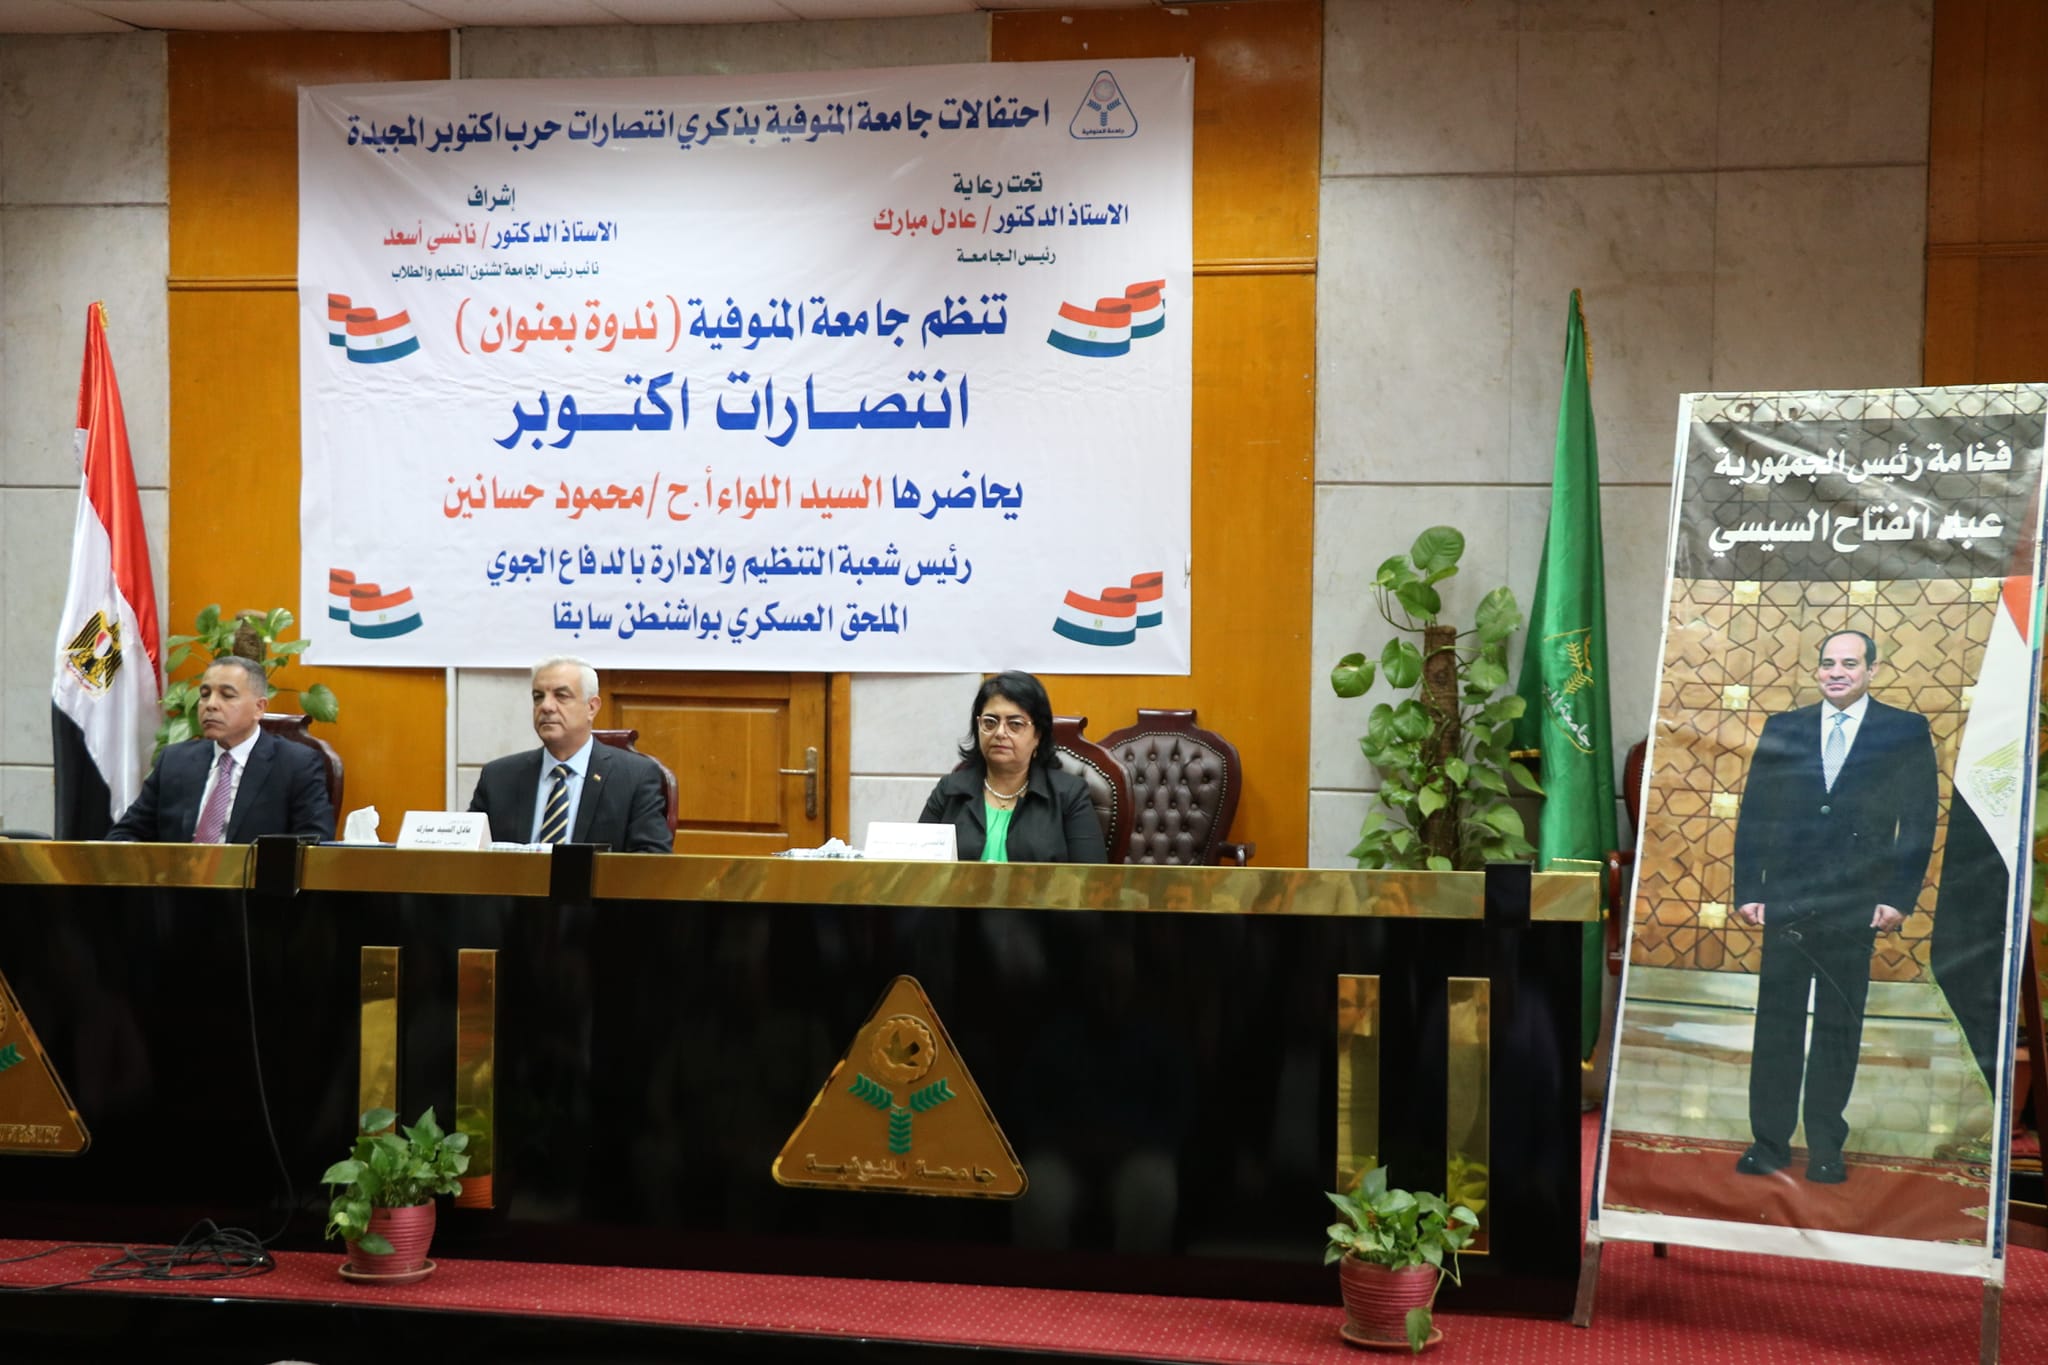 Menoufia University celebrates the October victories and organizes a student symposium